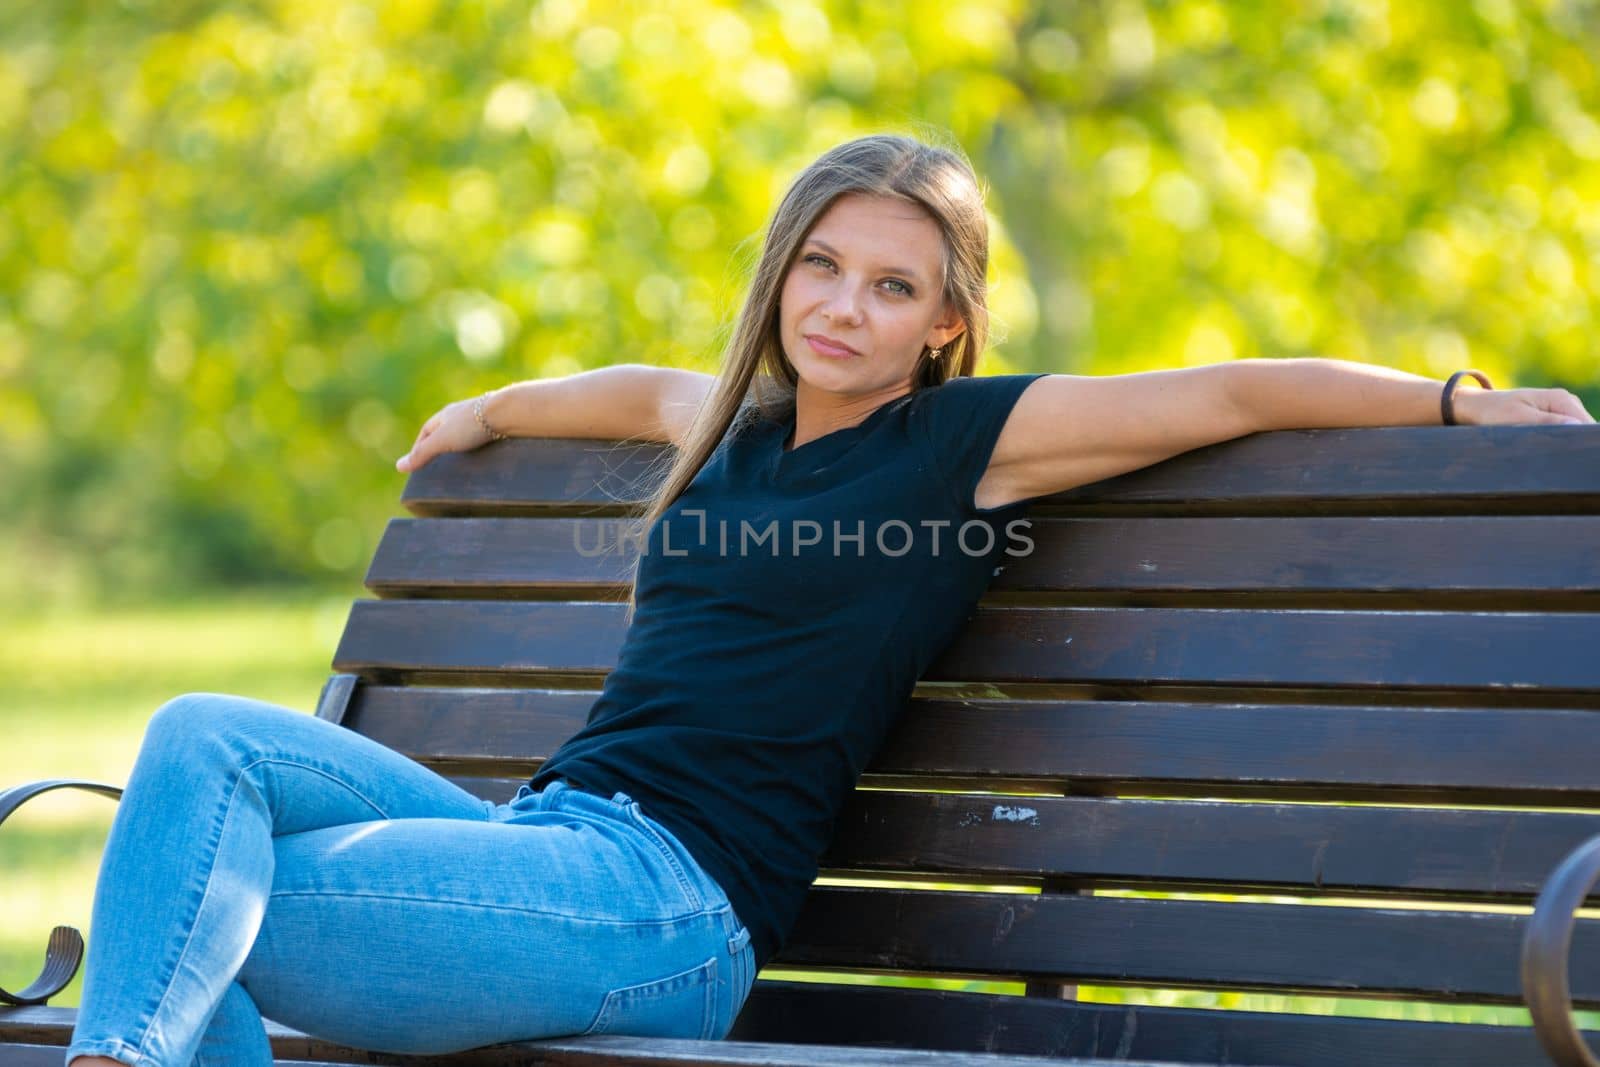 A girl sits on a bench in a sunny park and looks into the frame by Madhourse